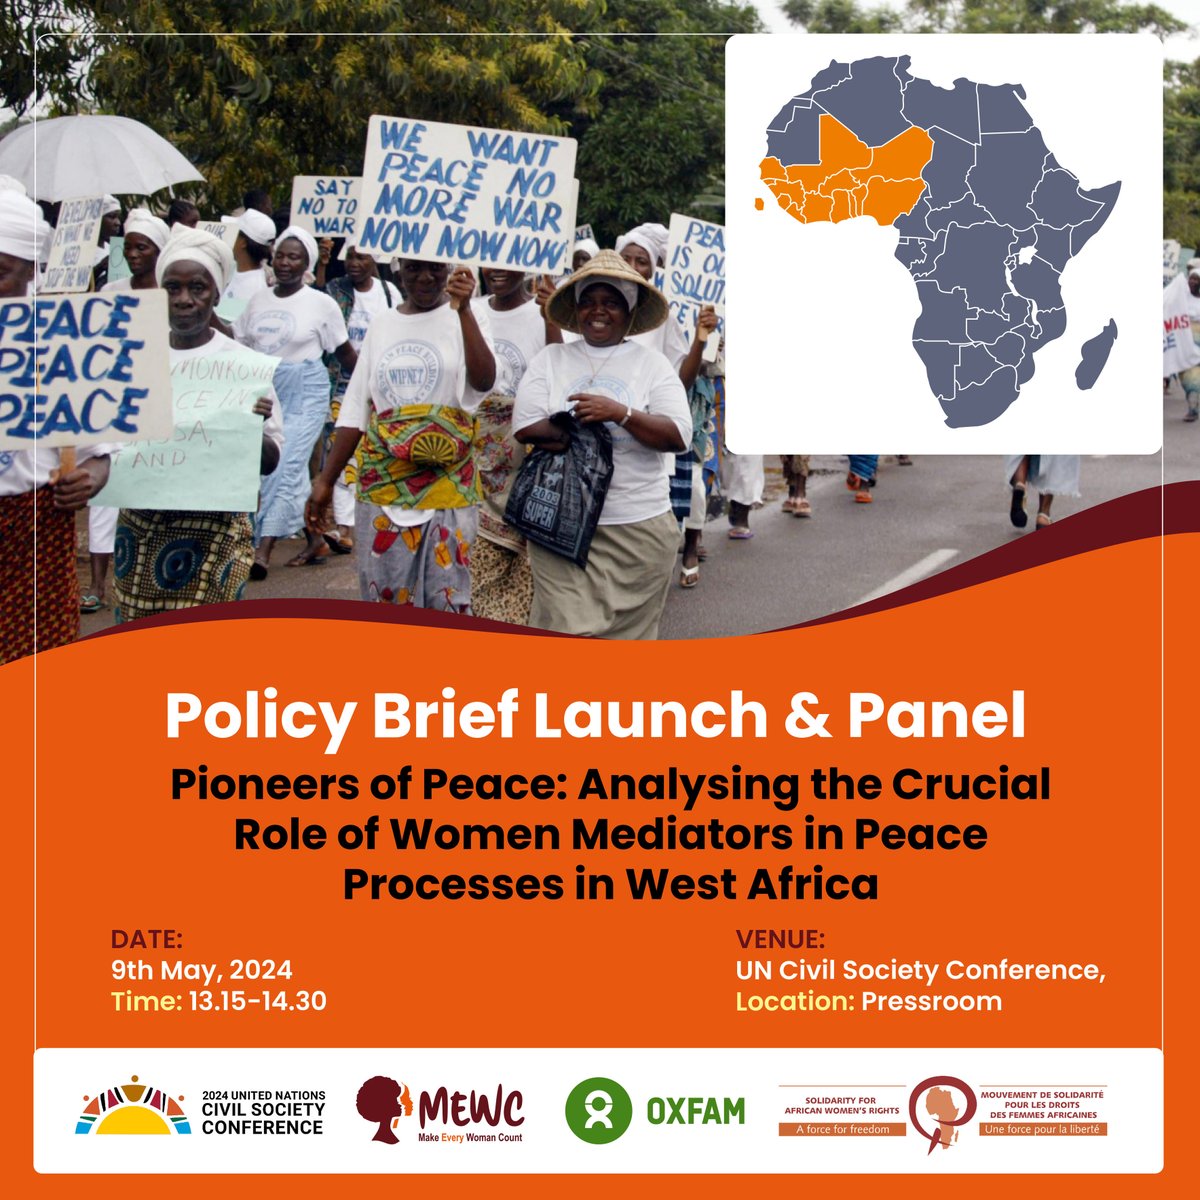 You’re invited to the exciting launch of our policy brief: Analysing the Crucial Role of Women Mediators in Peace Processes in West Africa! Join us for an exciting panel discussion on Thursday 9 May at 13:15 EAT Where? The Pressroom Register in advance: forms.gle/CwREMpuP3o3fu5…